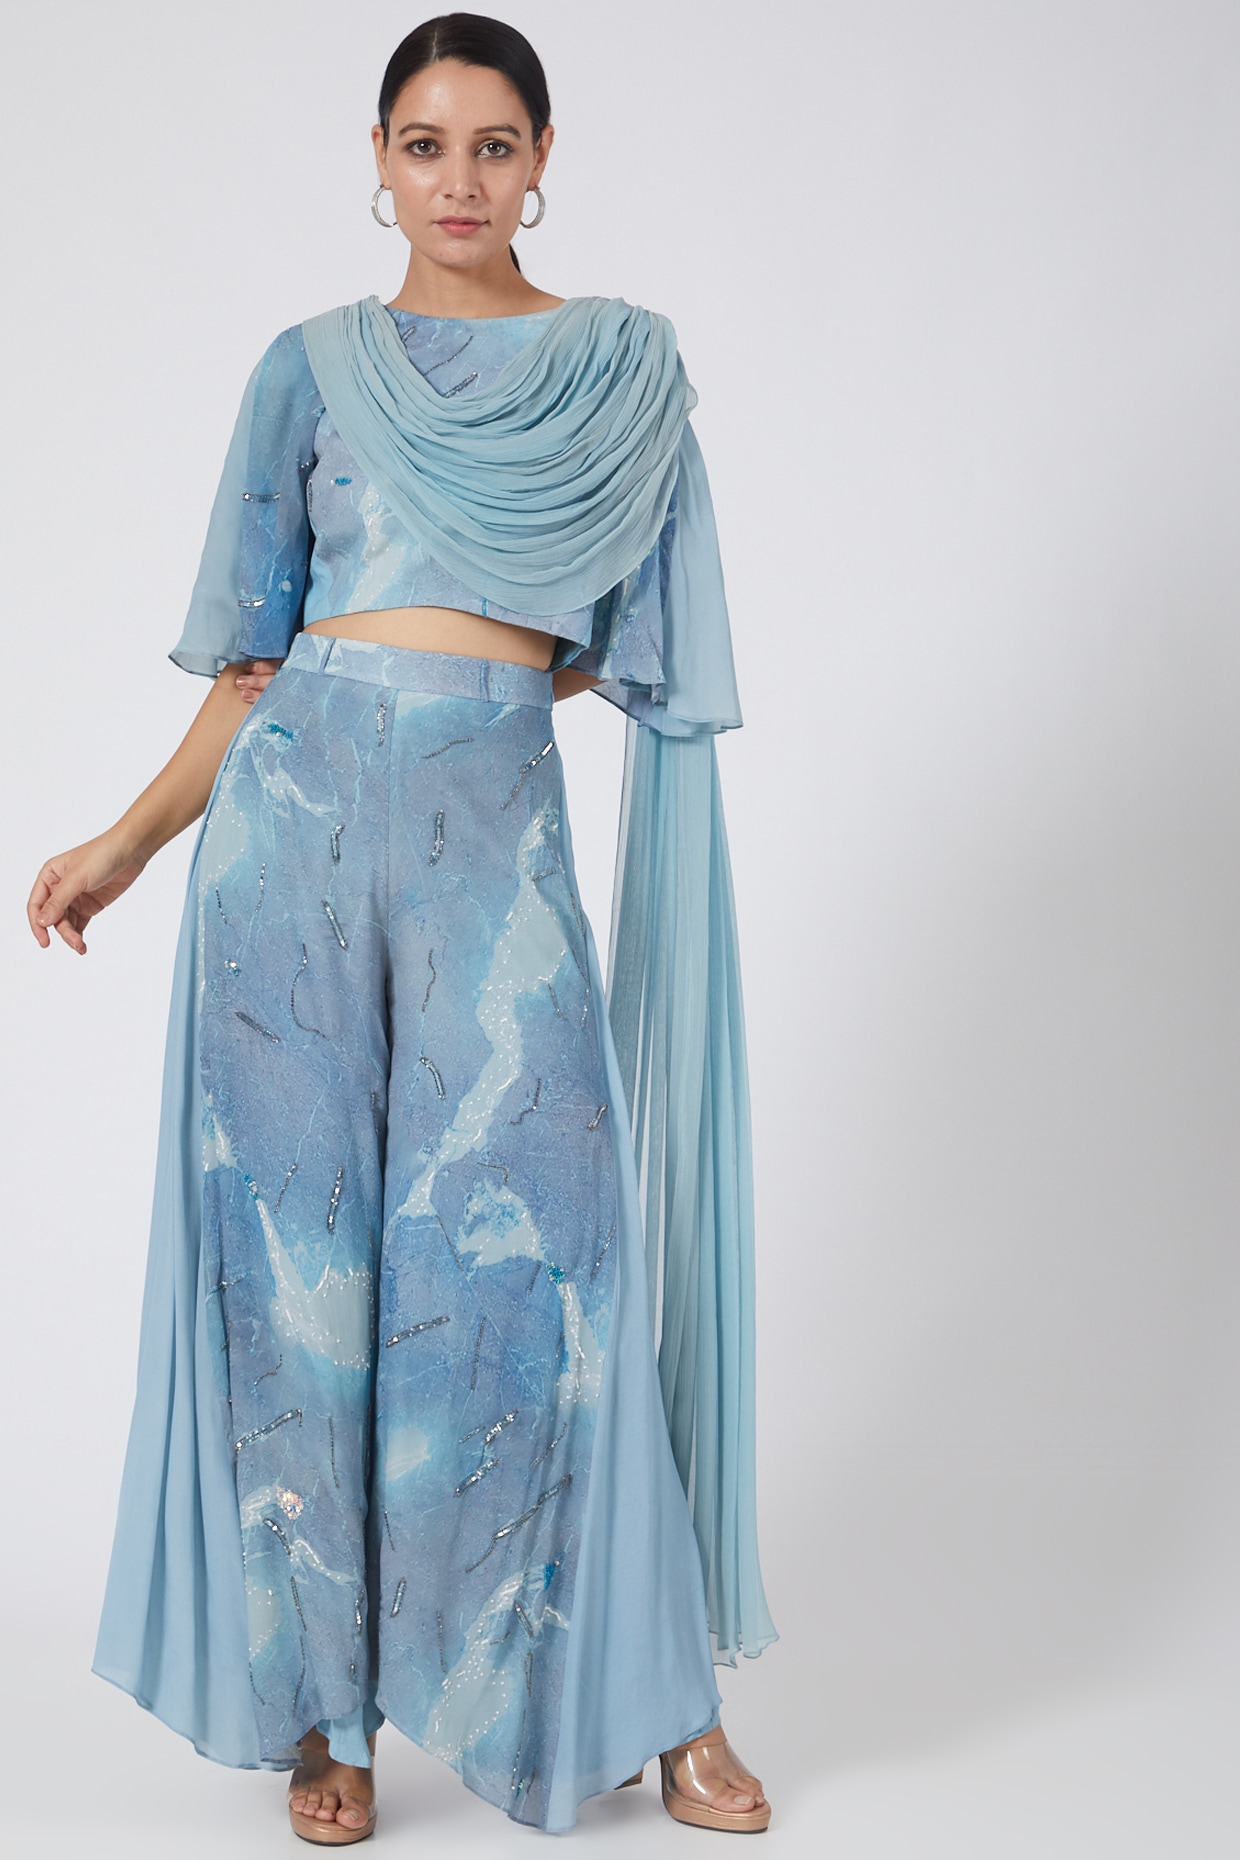 Women Embroidered Crop Top With Palazzo Pants And Long Shrug Indo Western  Outift | eBay